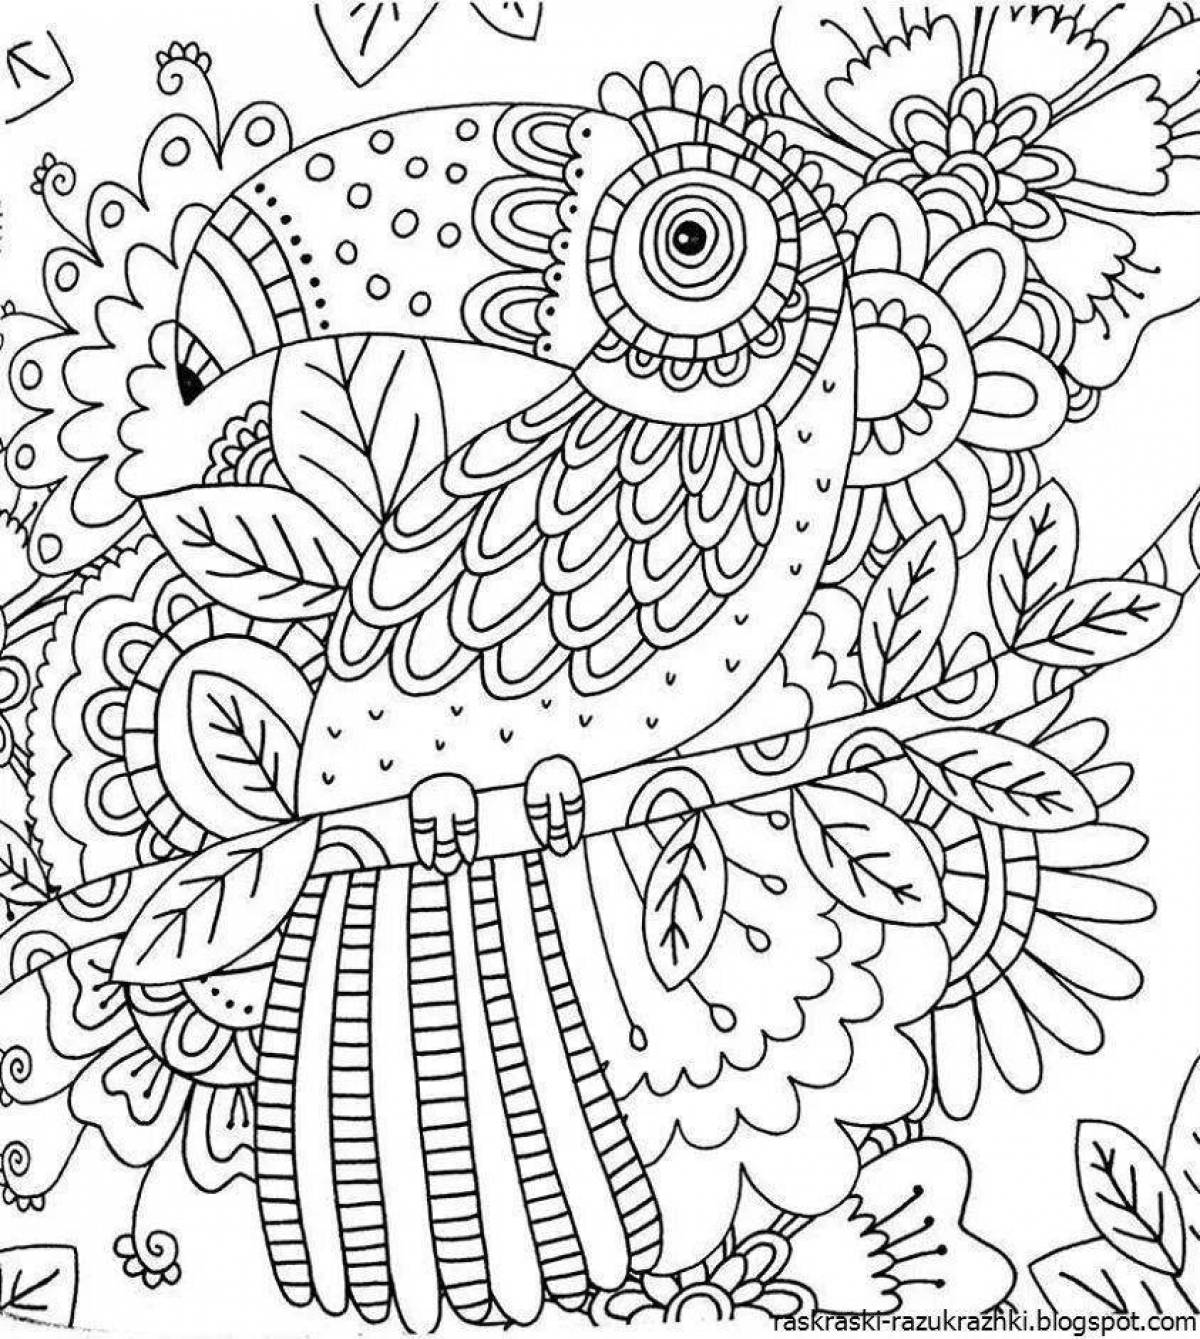 Relaxing anti-stress coloring book for girls